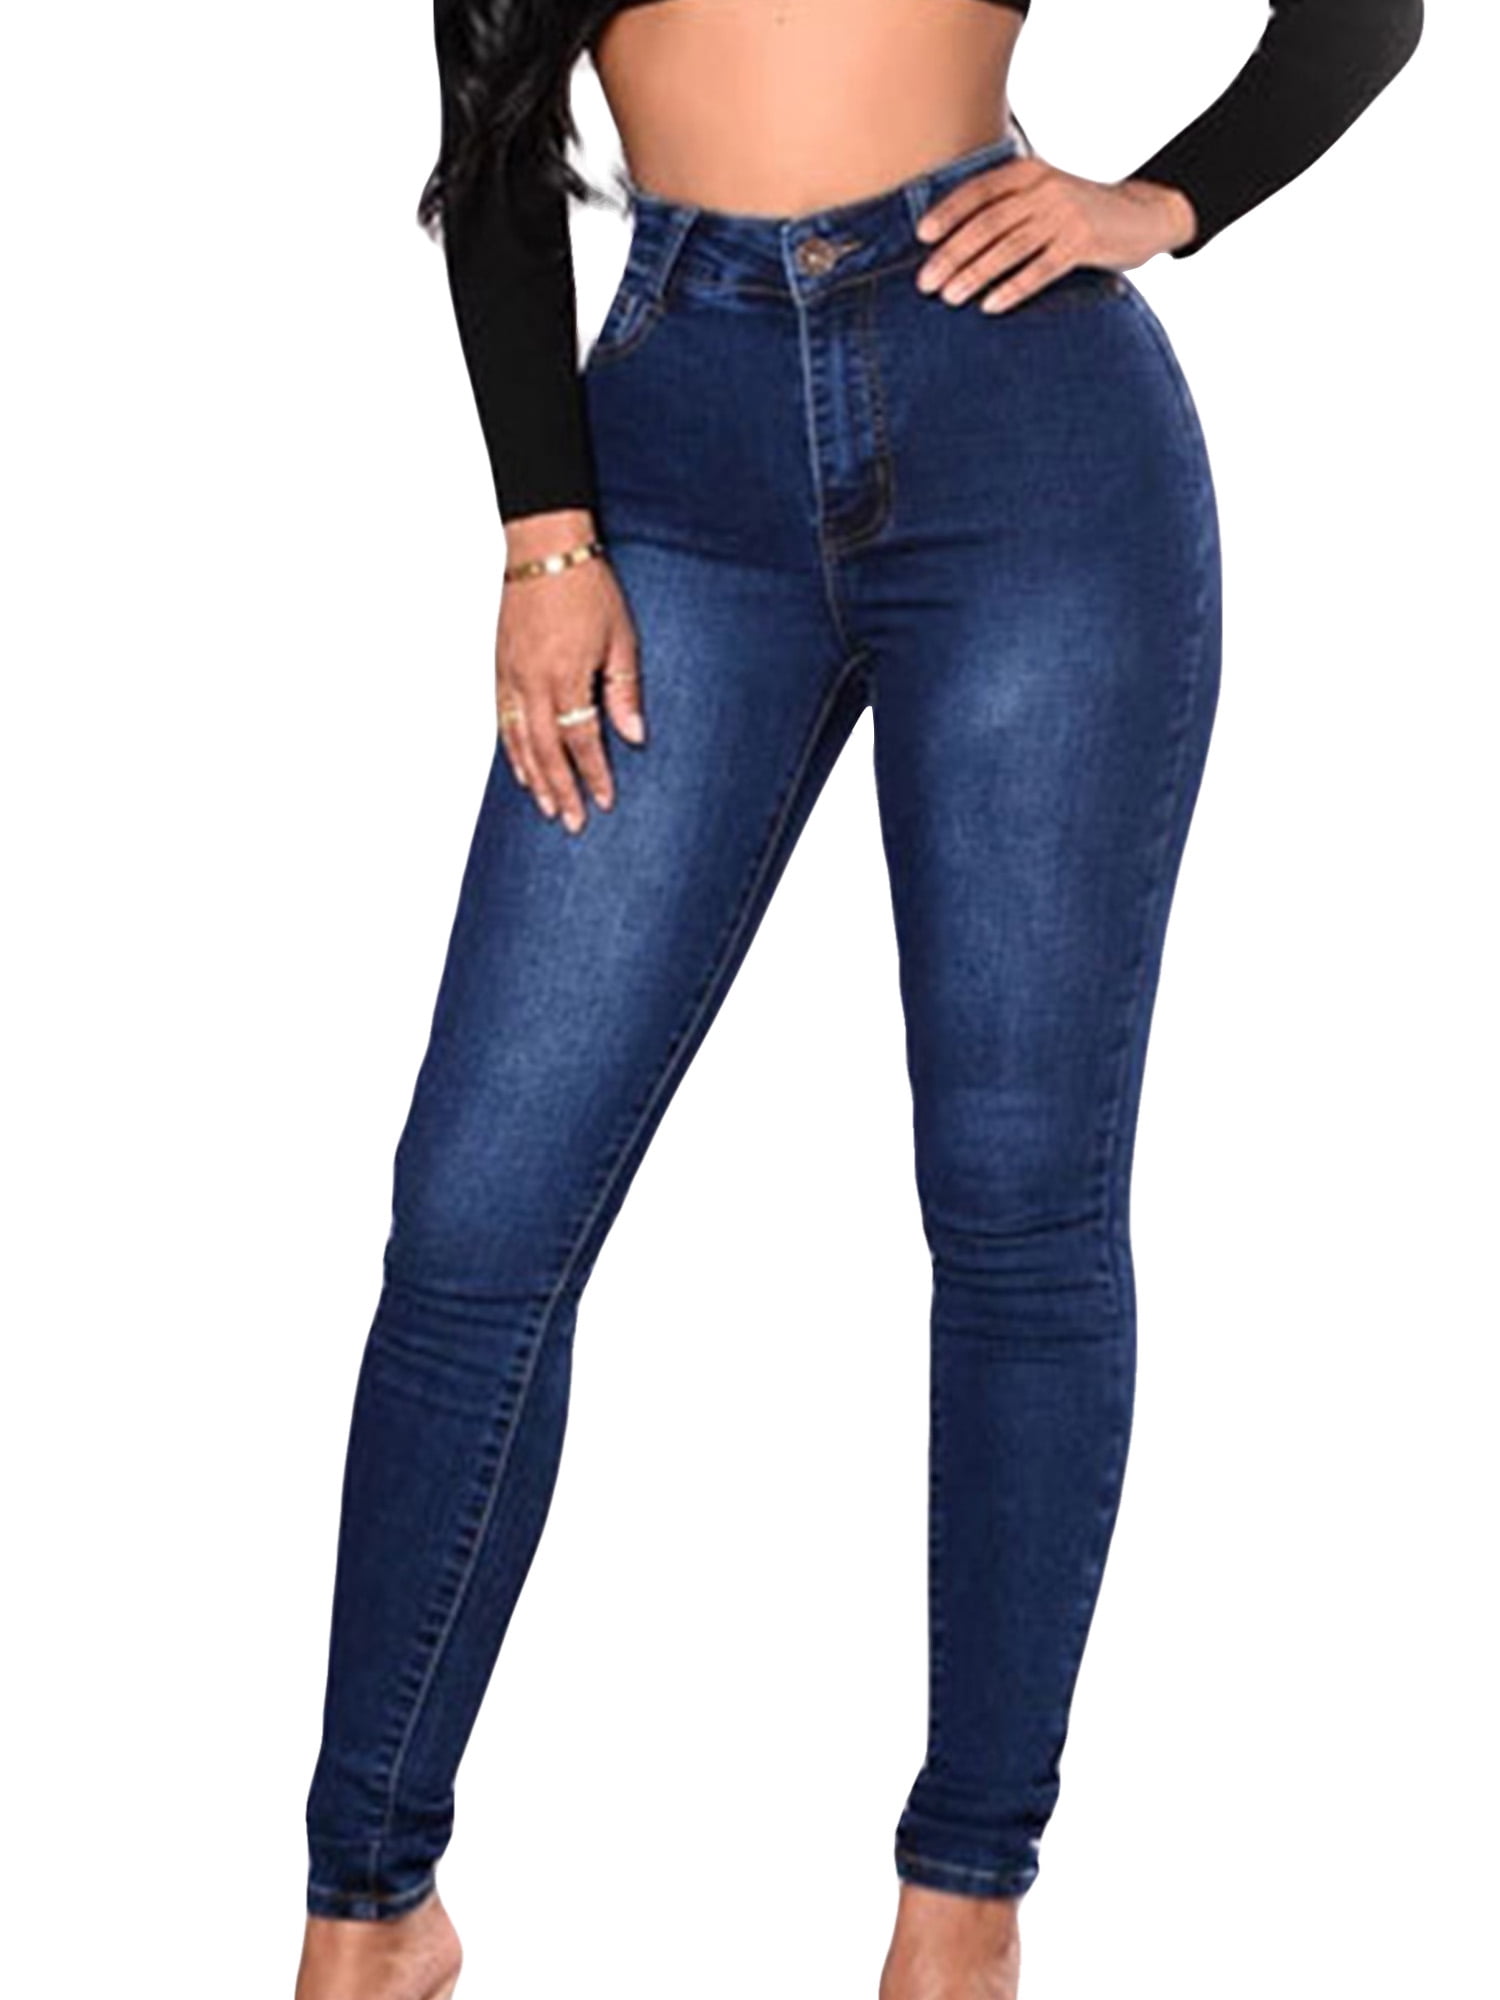 Women's Ultra High-Rise Jeans and Pants at AG Jeans Official Store